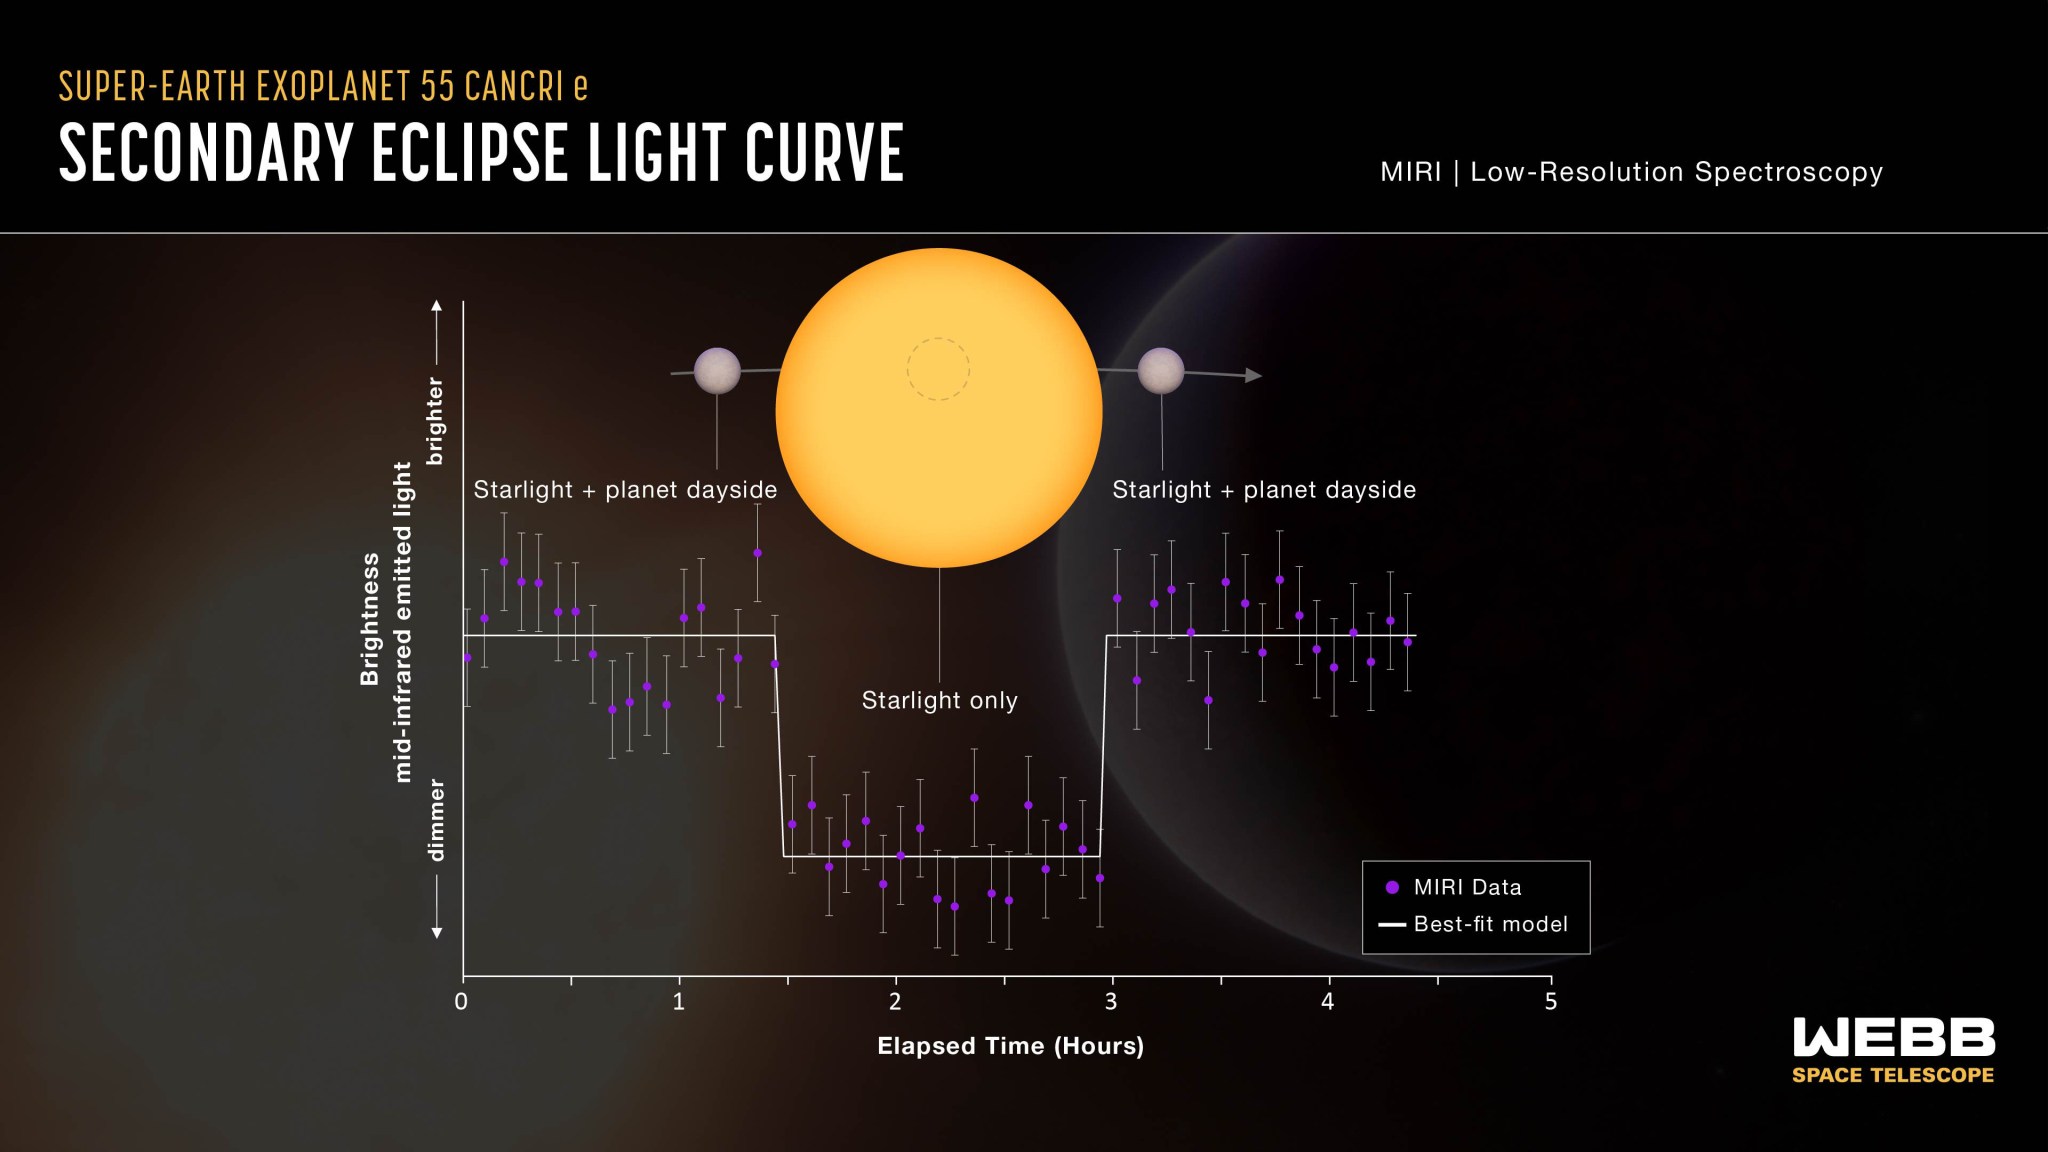 Infographic titled “Super-Earth Exoplanet 55 Cancri e Secondary Eclipse Light Curve, MIRI Low-Resolution Spectroscopy.” At the top of the infographic is a diagram showing a planet moving behind its star (a secondary eclipse). Below the diagram is a graph showing the change in brightness of mid-infrared light emitted by the star-planet system over the course of about four-and-a-half hours. The diagram and graph are aligned vertically to show the relationship between the geometry of the star-planet system as the planet orbits, and the measurements on the graph. The infographic shows that the brightness of the system decreases as the planet moves behind the star.